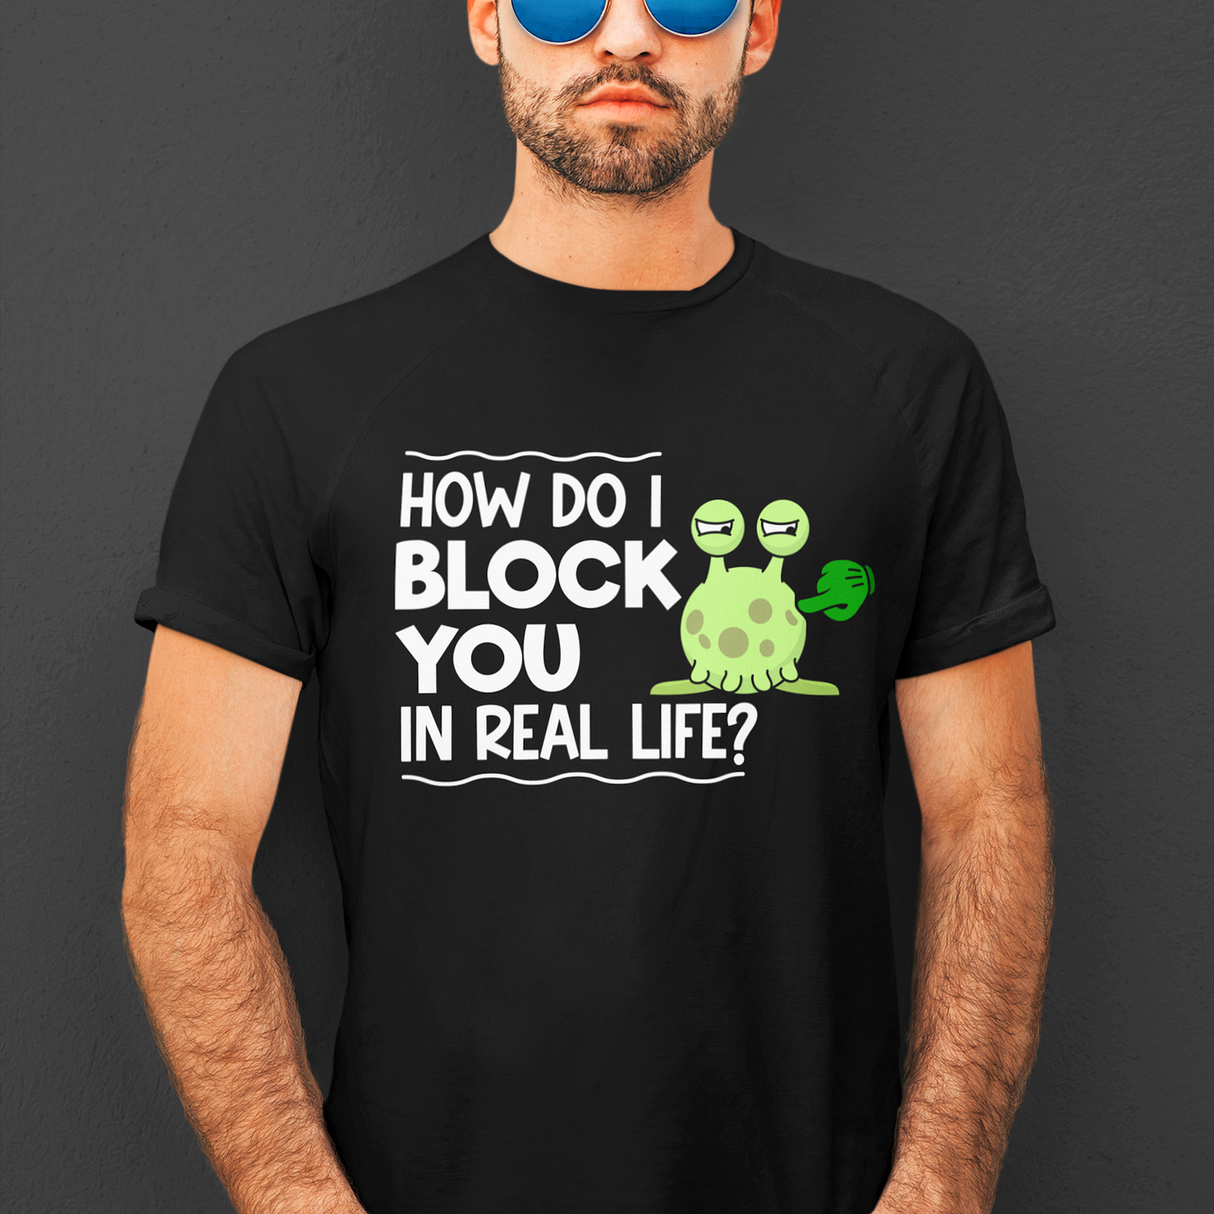 how-do-i-block-you-in-real-life-life-tee-funny-t-shirt-funny-tee-bold-t-shirt-sassy-tee#color_black